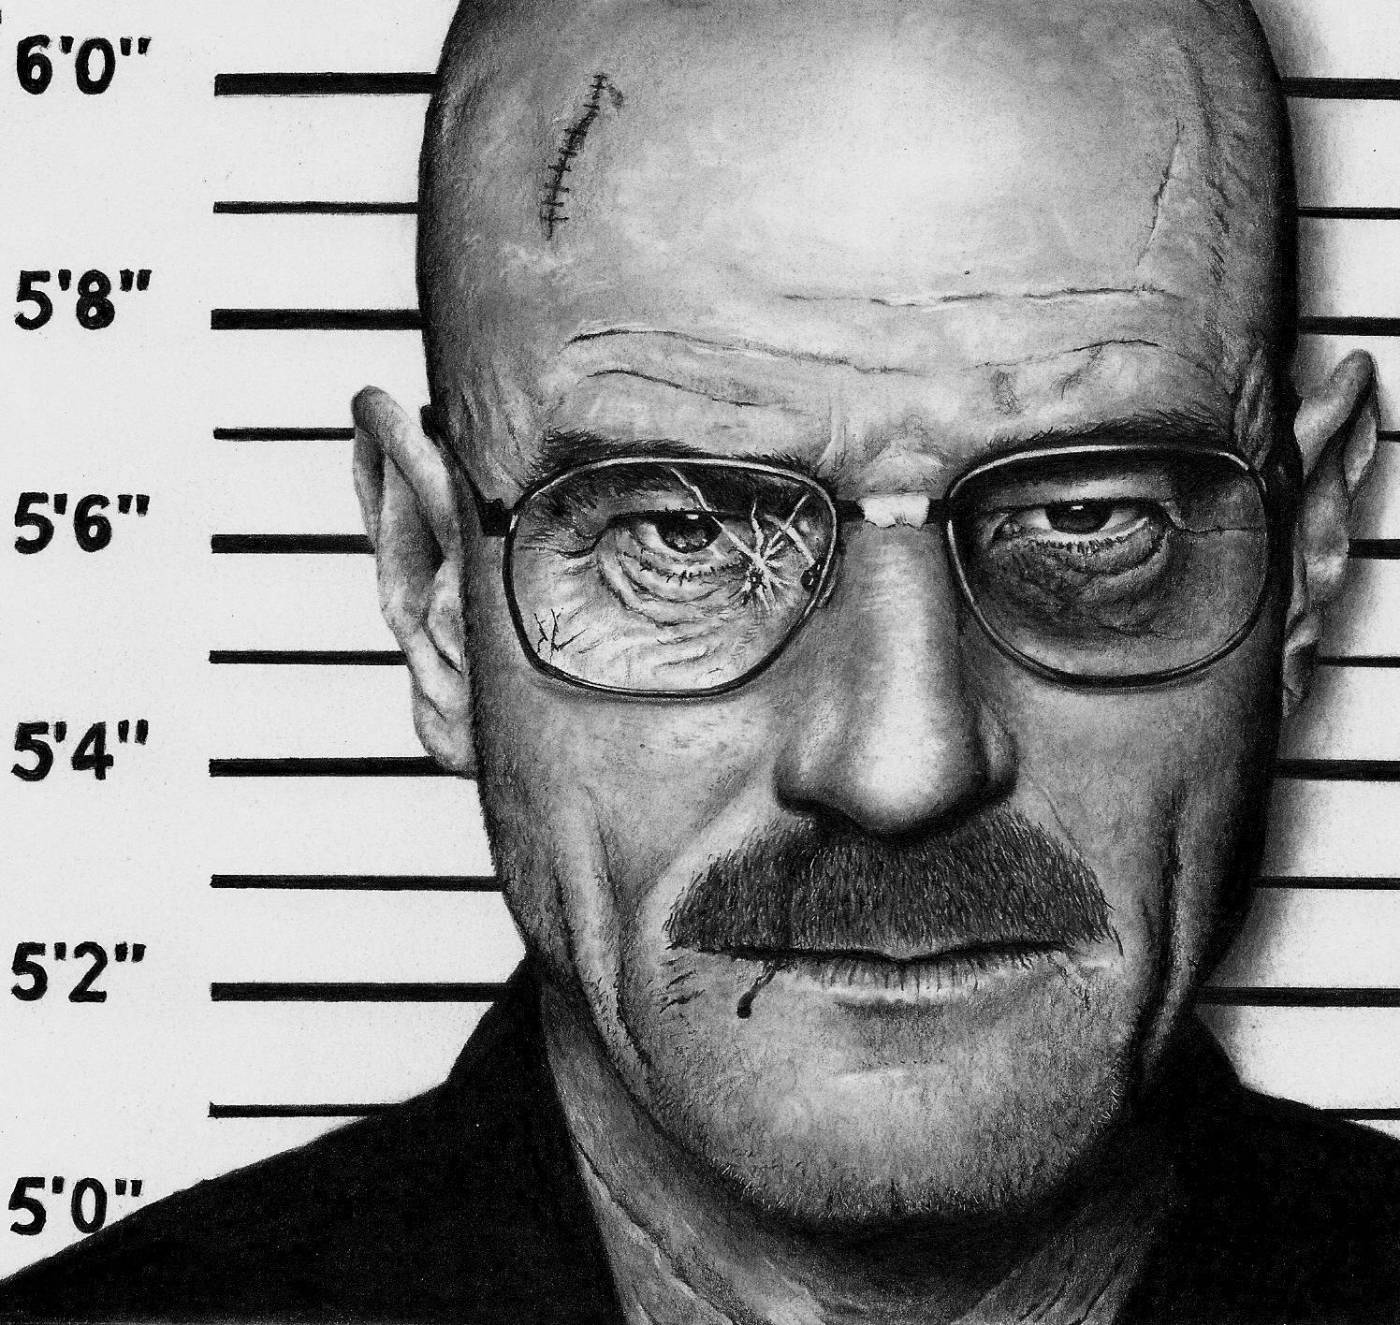 Bryan Cranston in 'Breaking Bad' by Rick Fortson